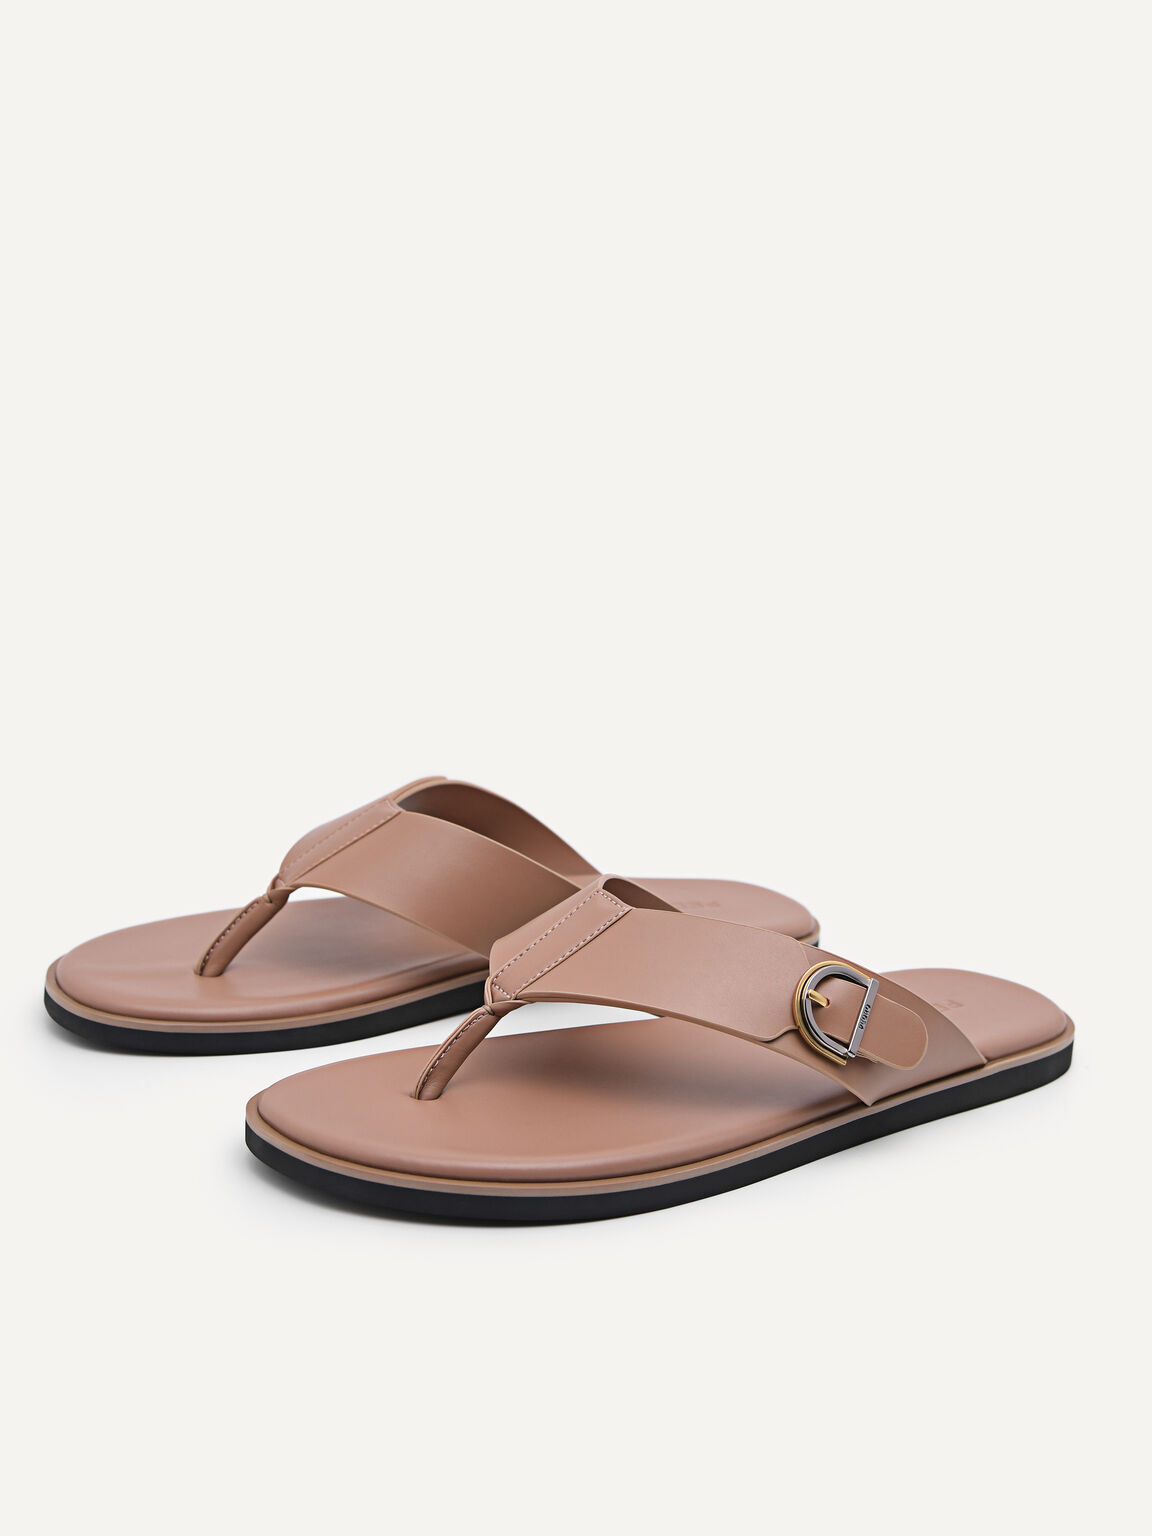 Thong Sandals, Taupe